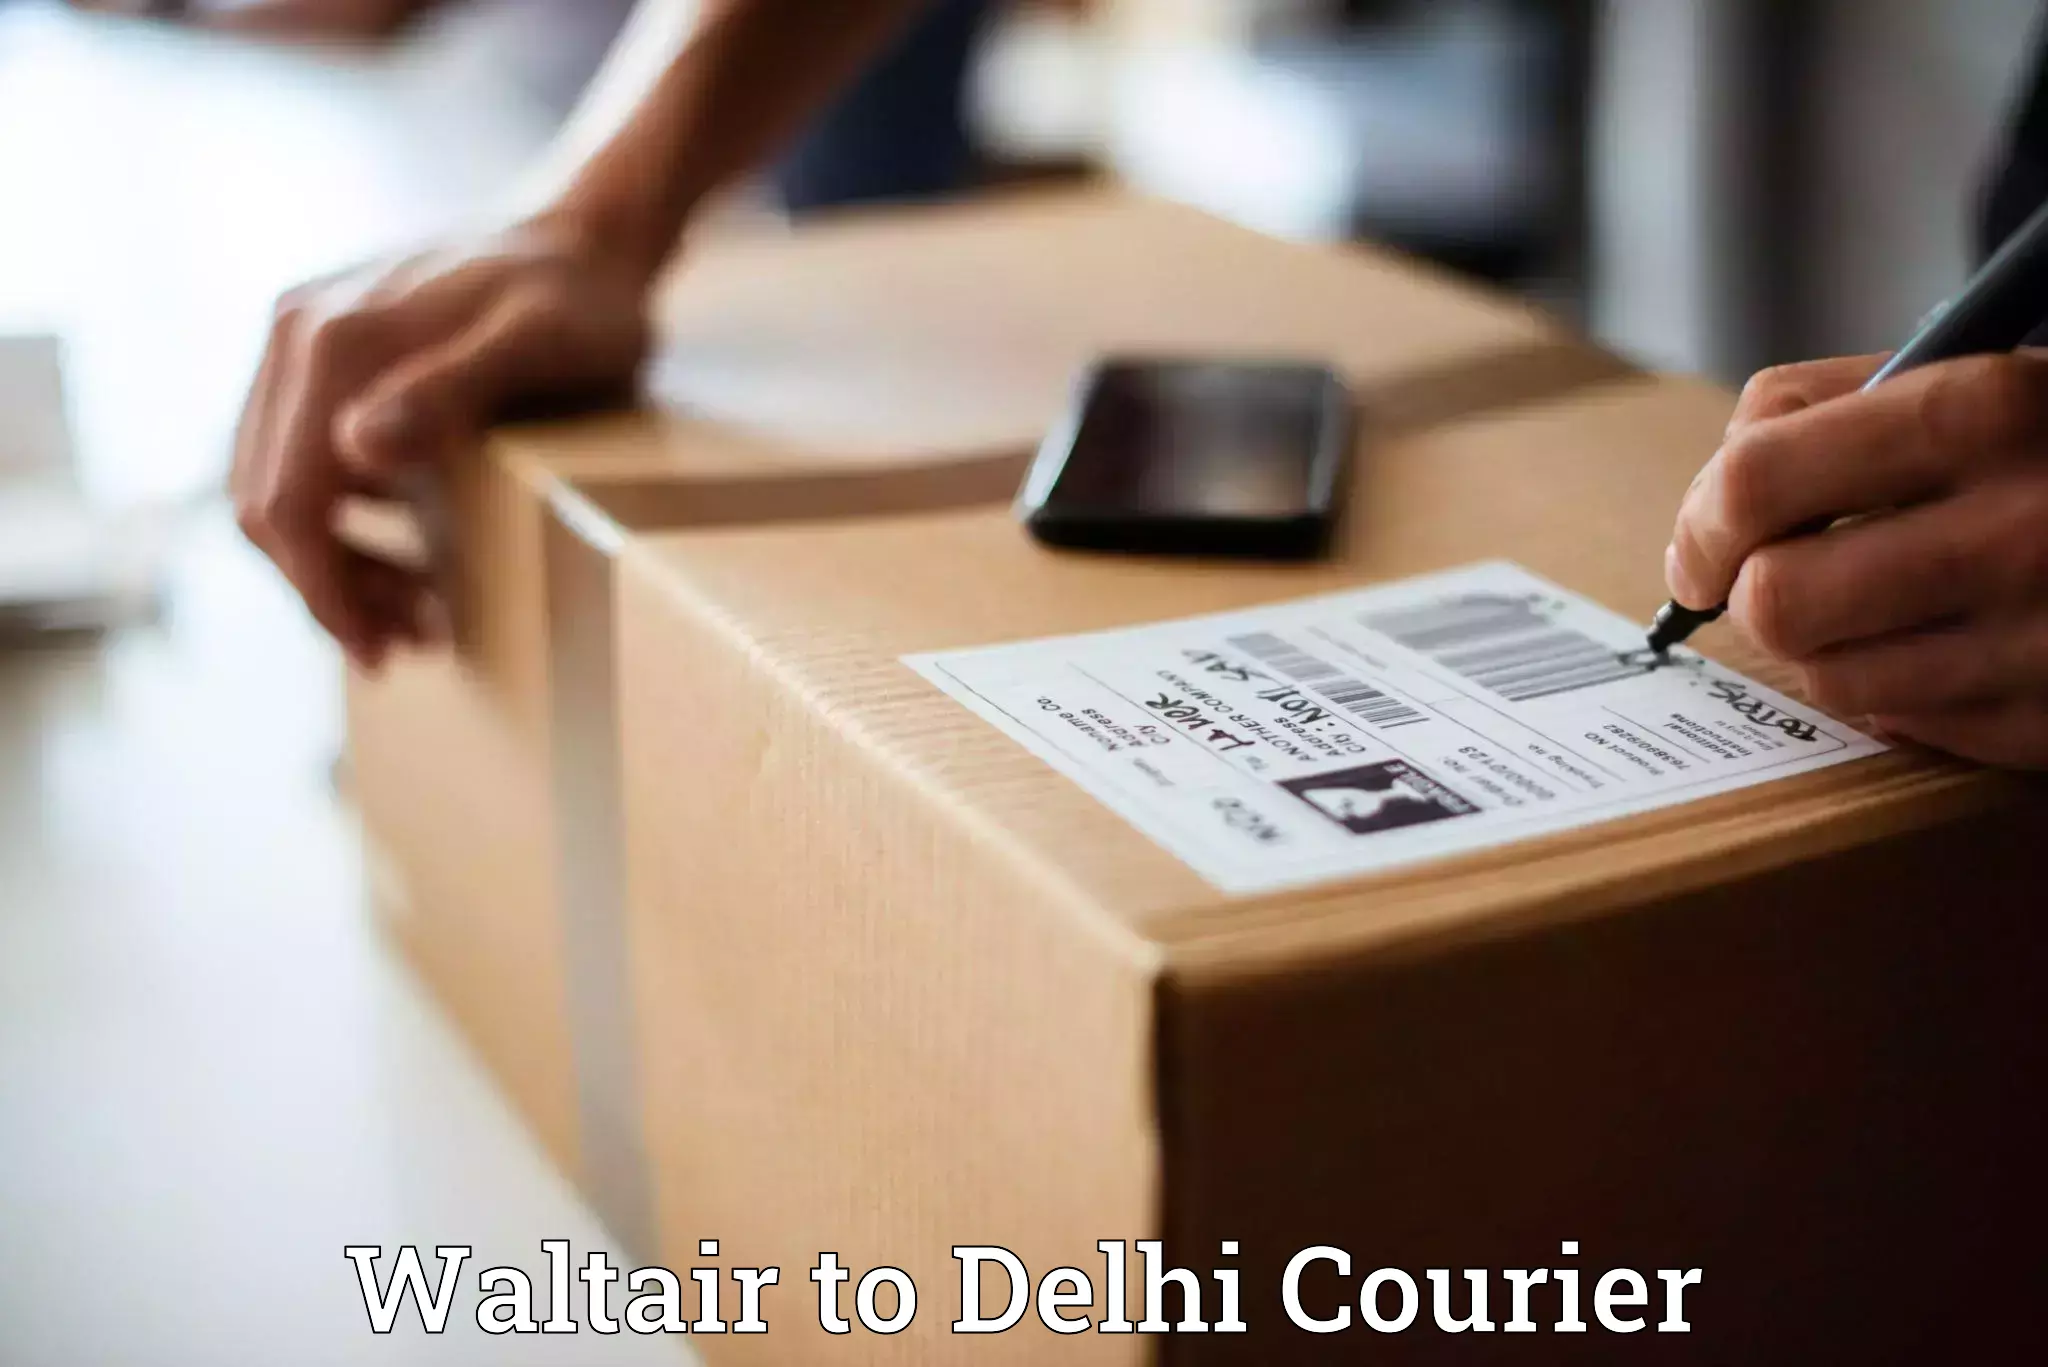 High-capacity parcel service Waltair to Lodhi Road